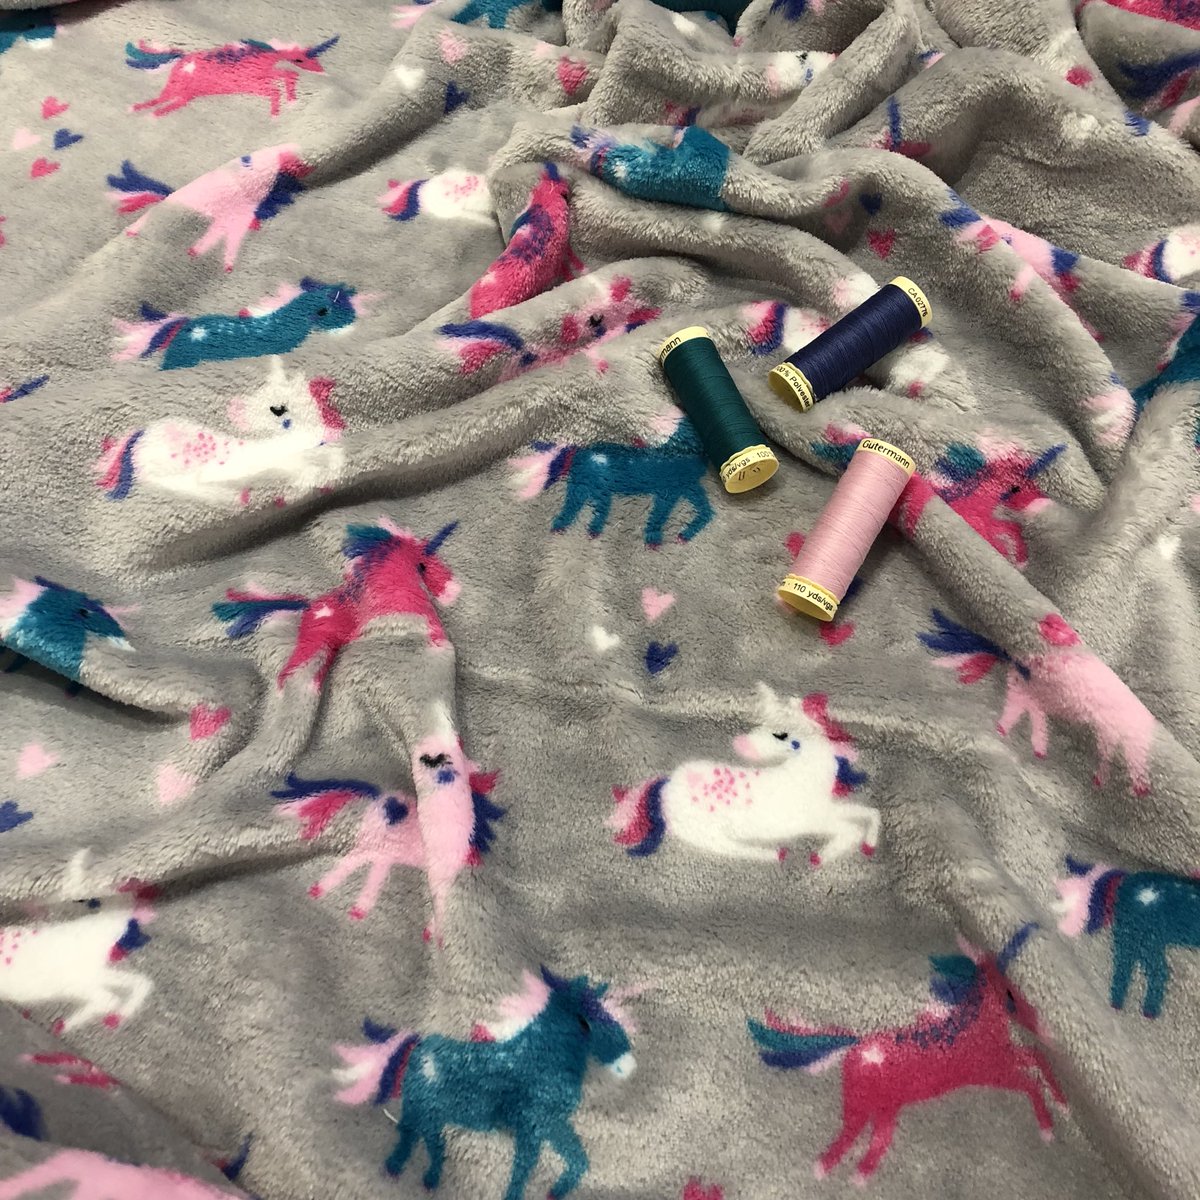 Our new unicorn cuddle fleece is very appropriate as we count down to Sew Saturday this weekend. Don’t think the fabric will be in stock for long 🦄 @SewHQ #sewsaturday 
#cuddlefleece #fleece #handmade #fabric #fleeceblanket #throw #sewing #bedthrow #quilt #babyblanket #fabrics